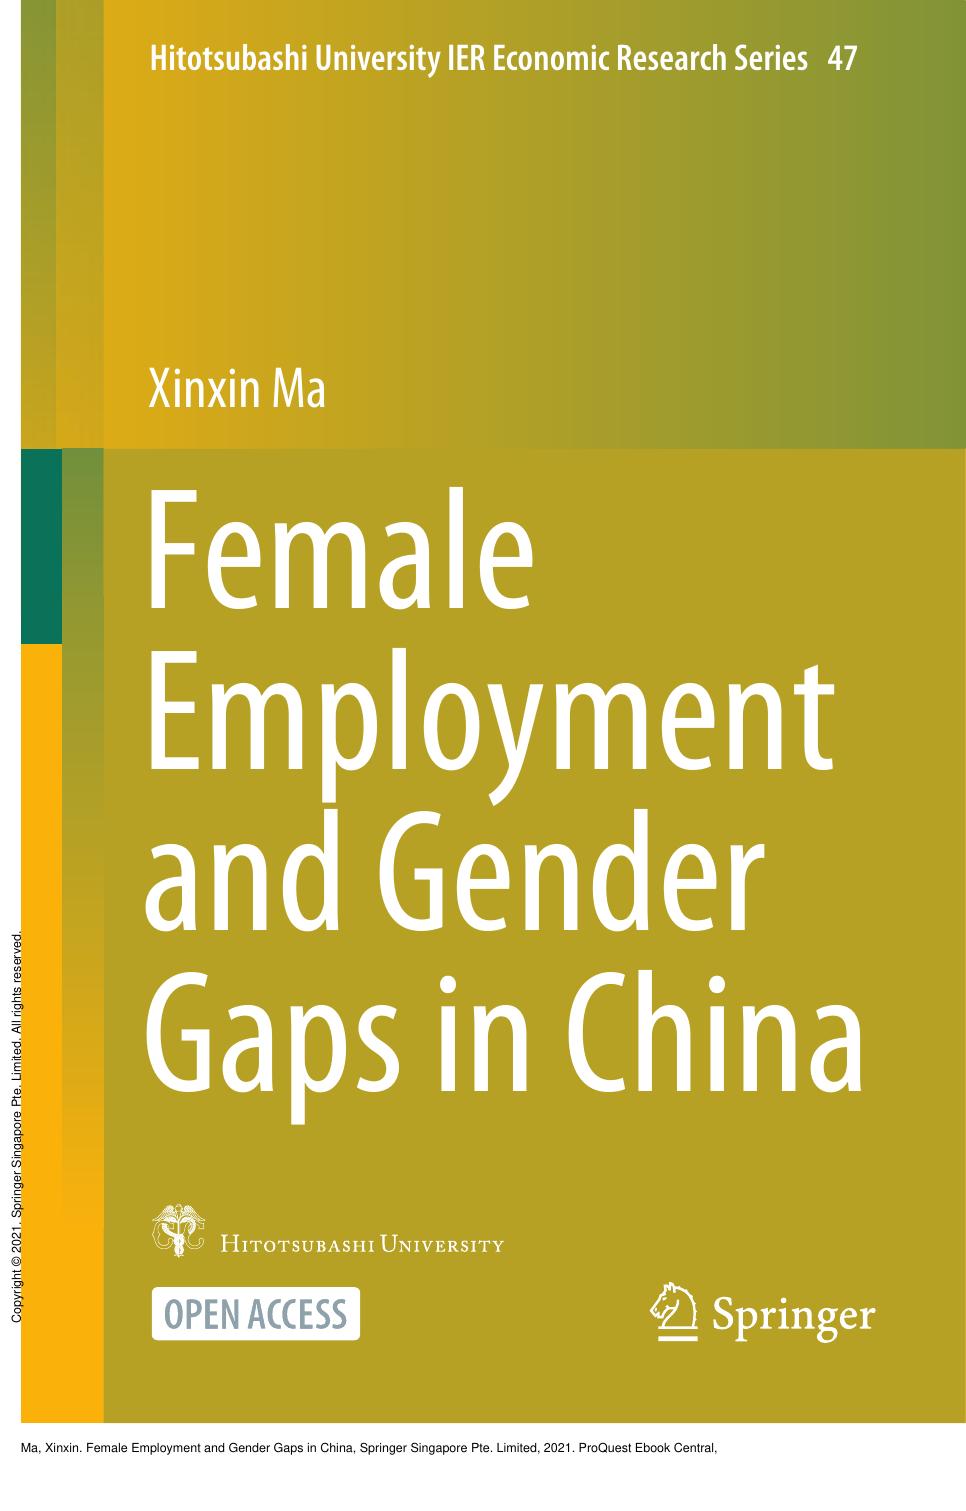 Female Employment and Gender Gaps in China by Xinxin Ma